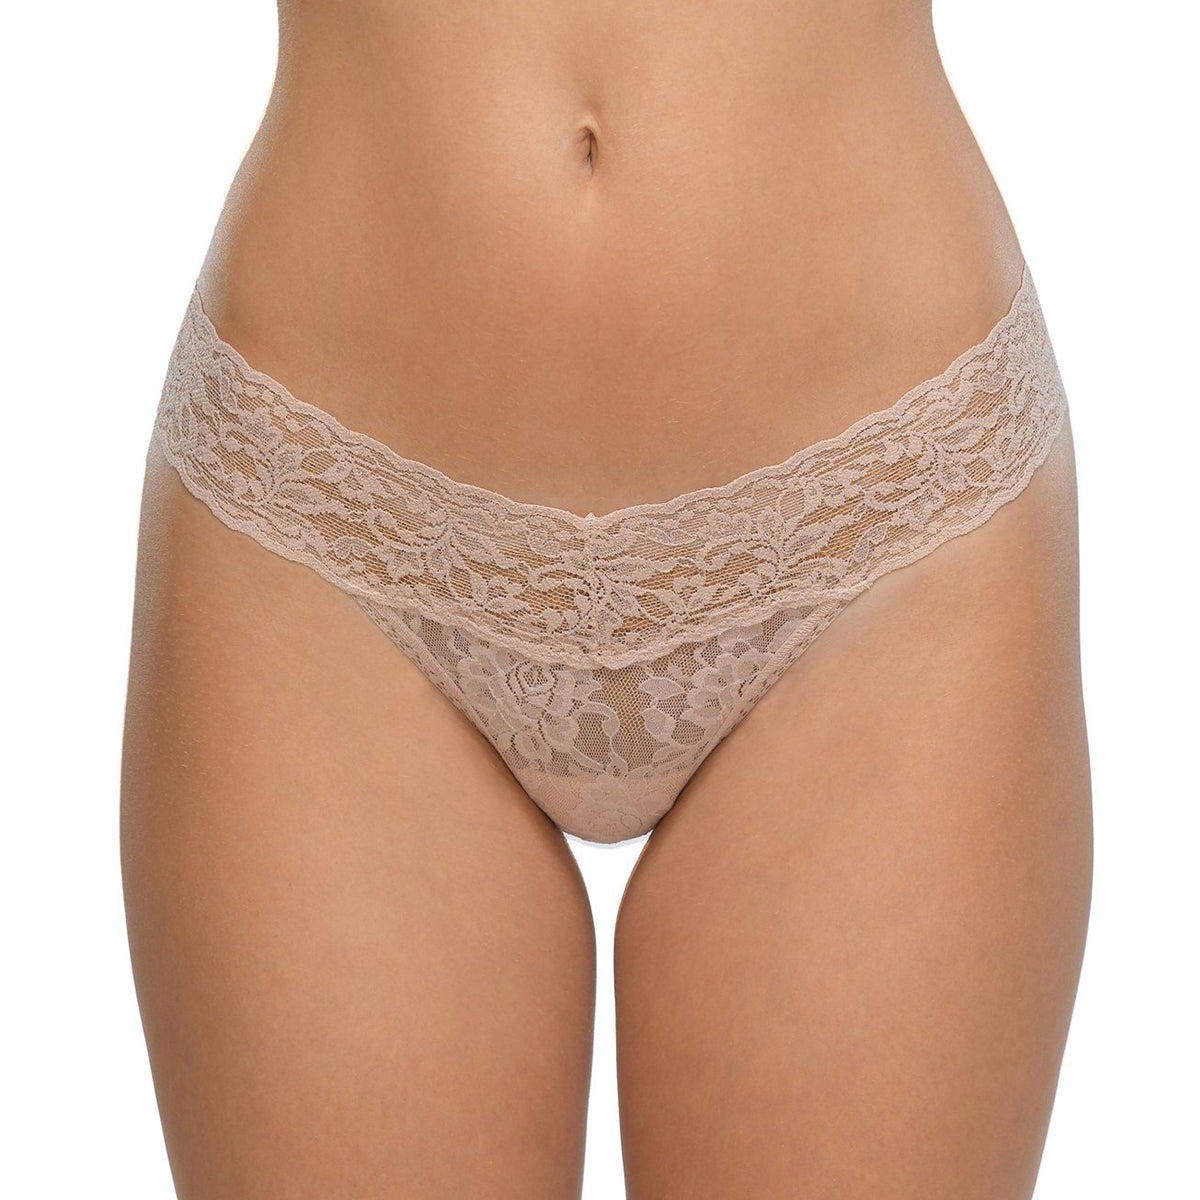 Hanky Panky Lace thong in chai nude lace panty lingerie canada linea intima toronto low rise thong